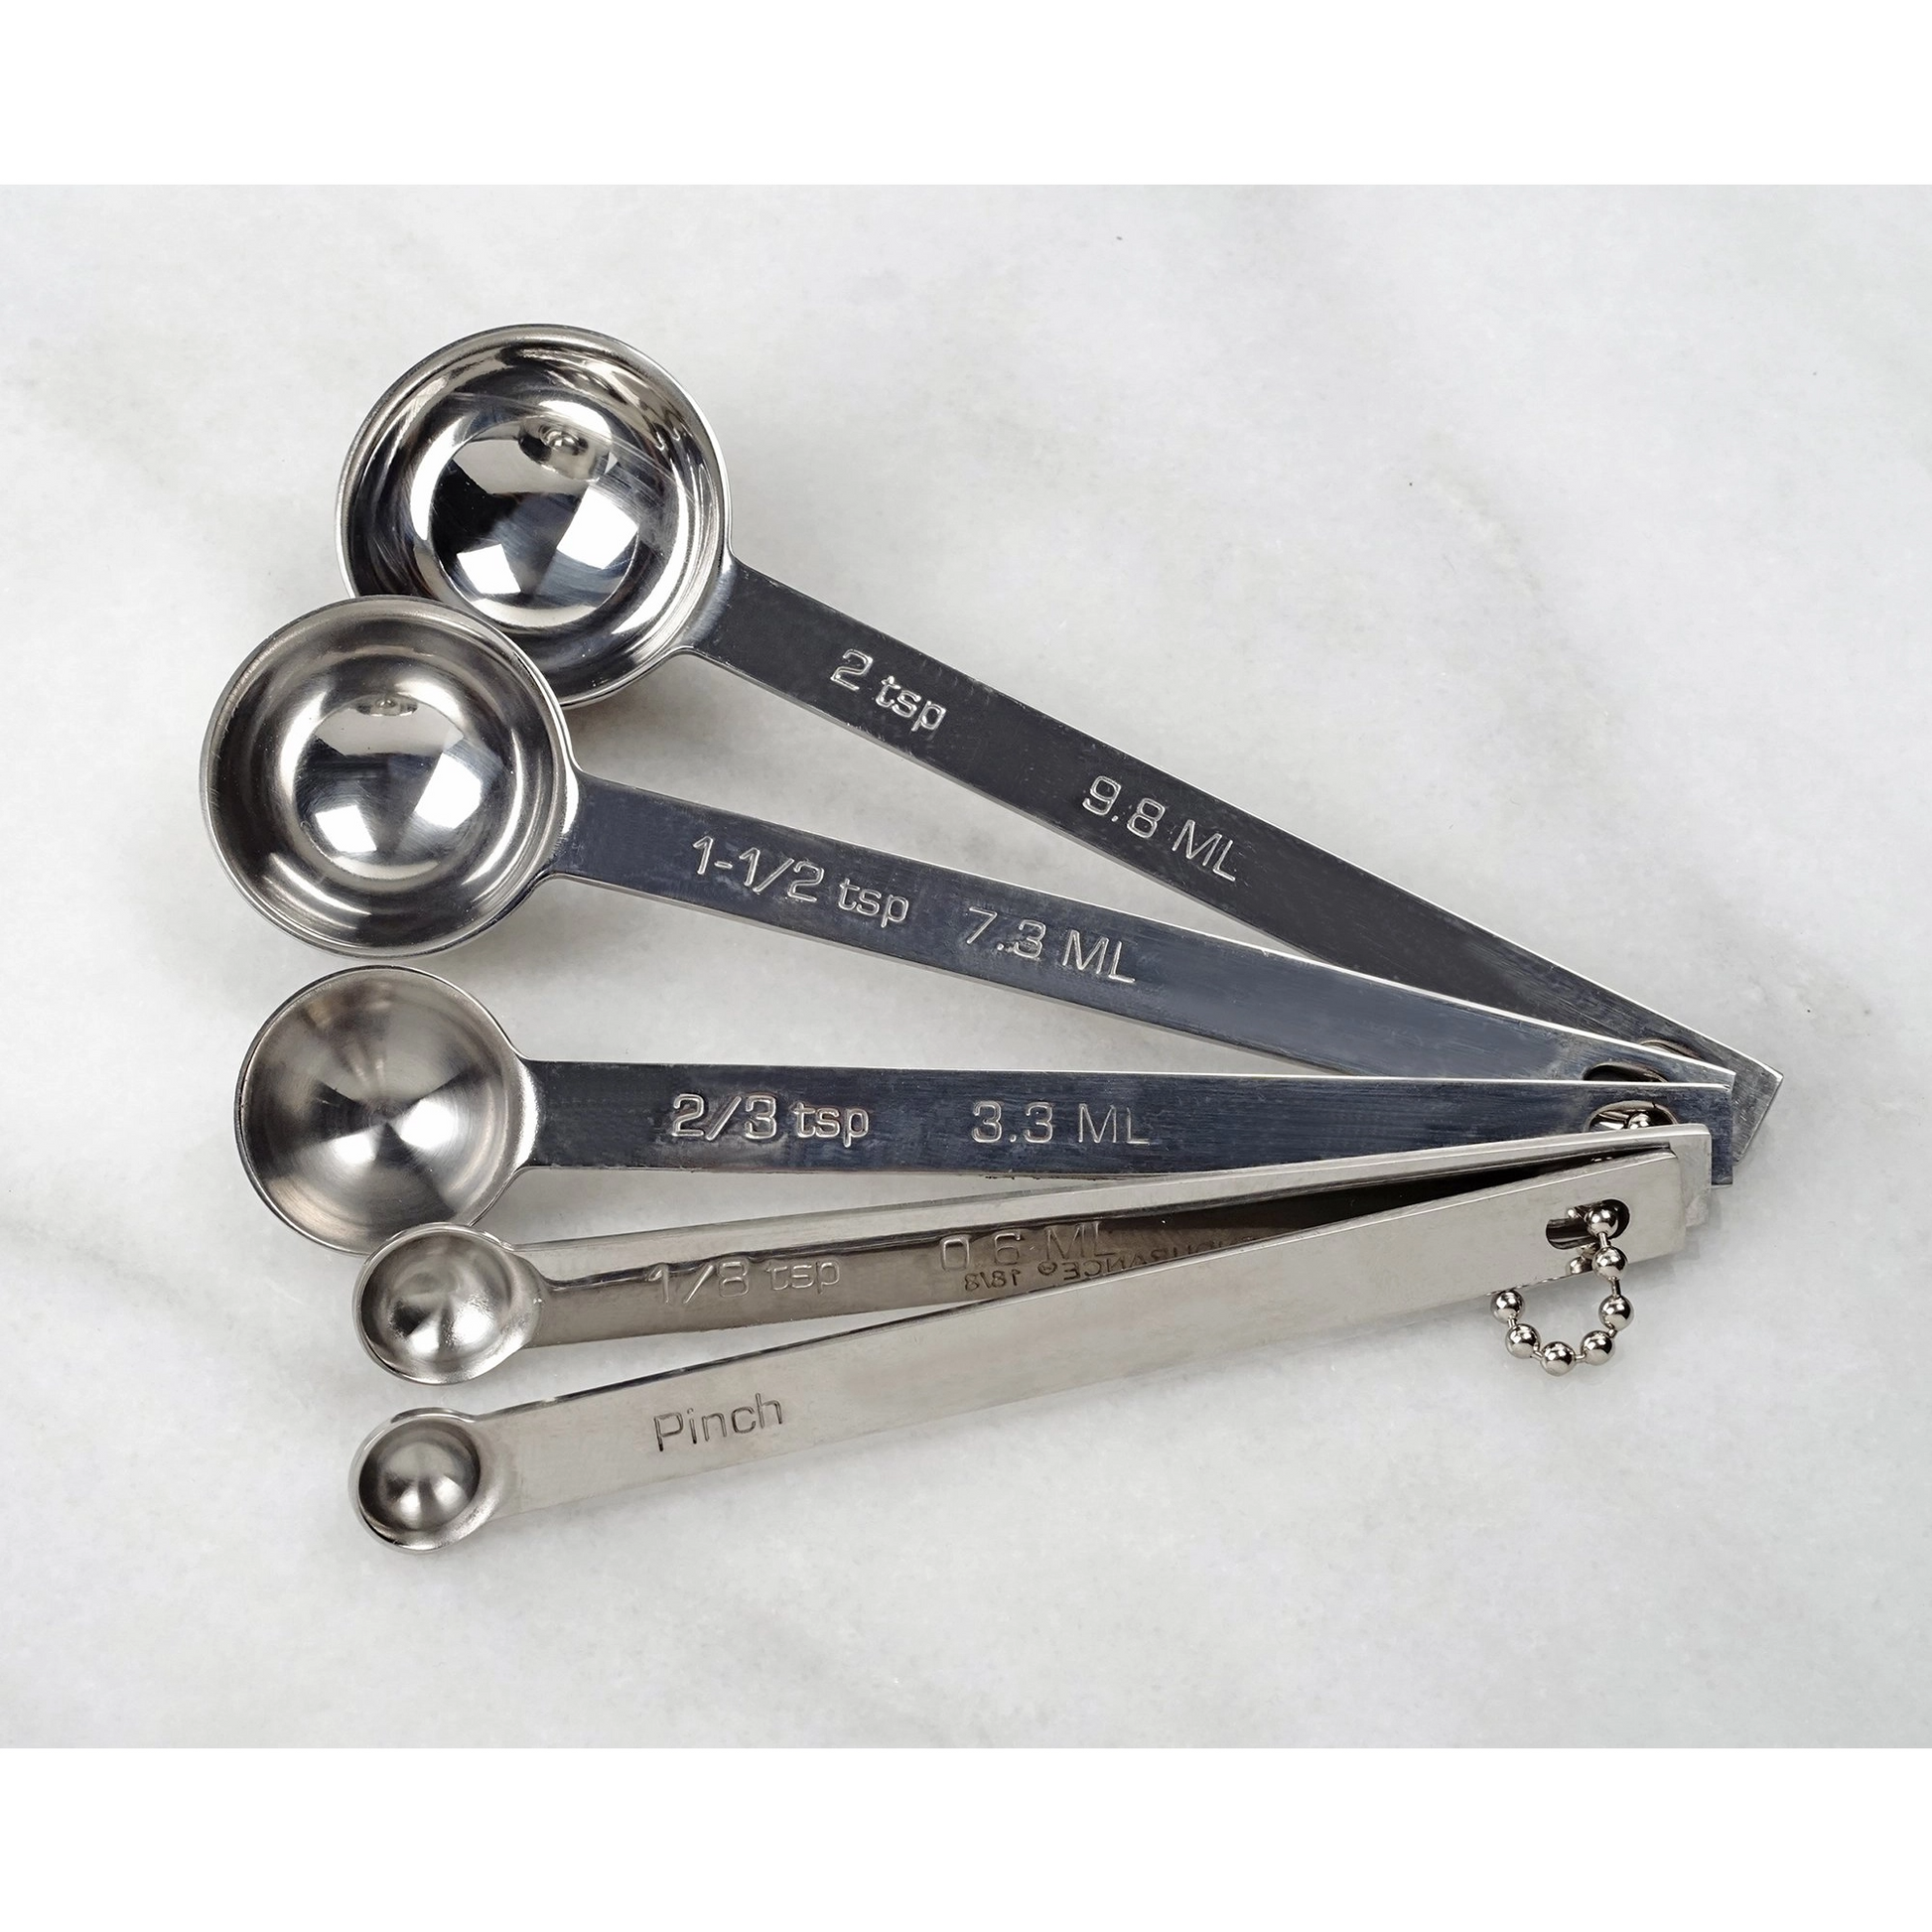 3 Piece, Just A Pinch Measuring Spoon Set